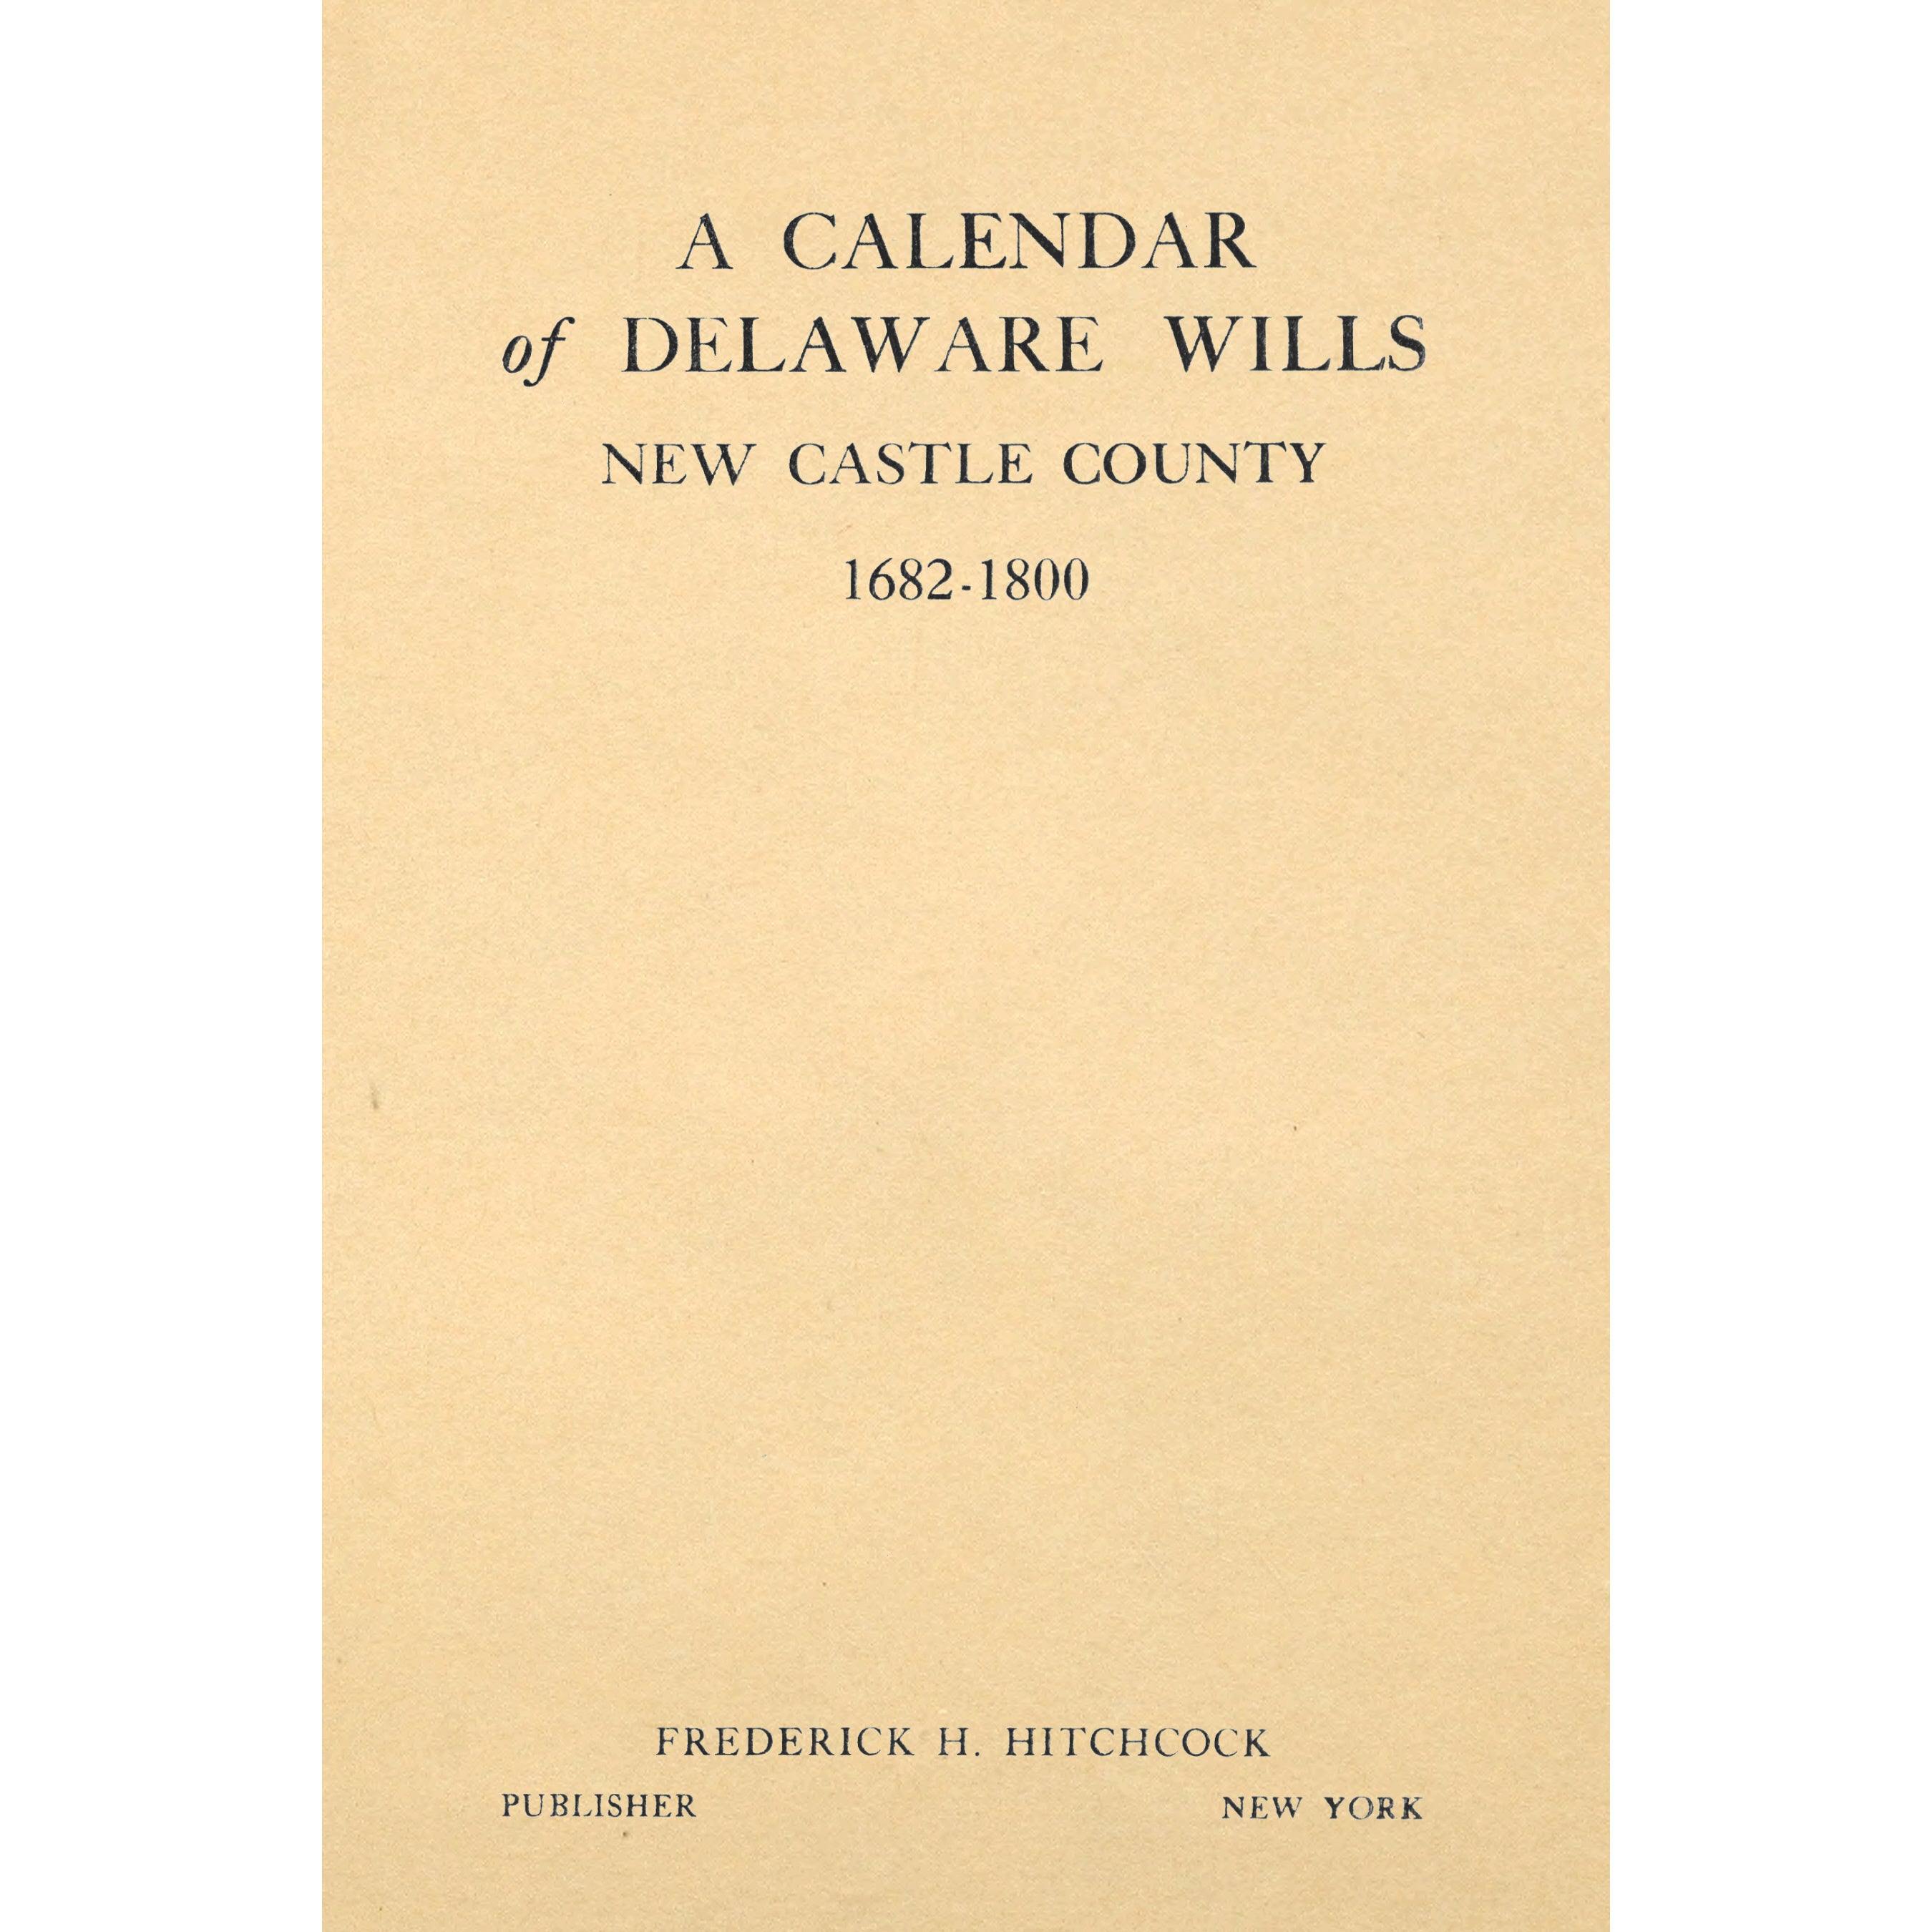 A Calender of Delaware Wills, New Castle County, 1682-1800